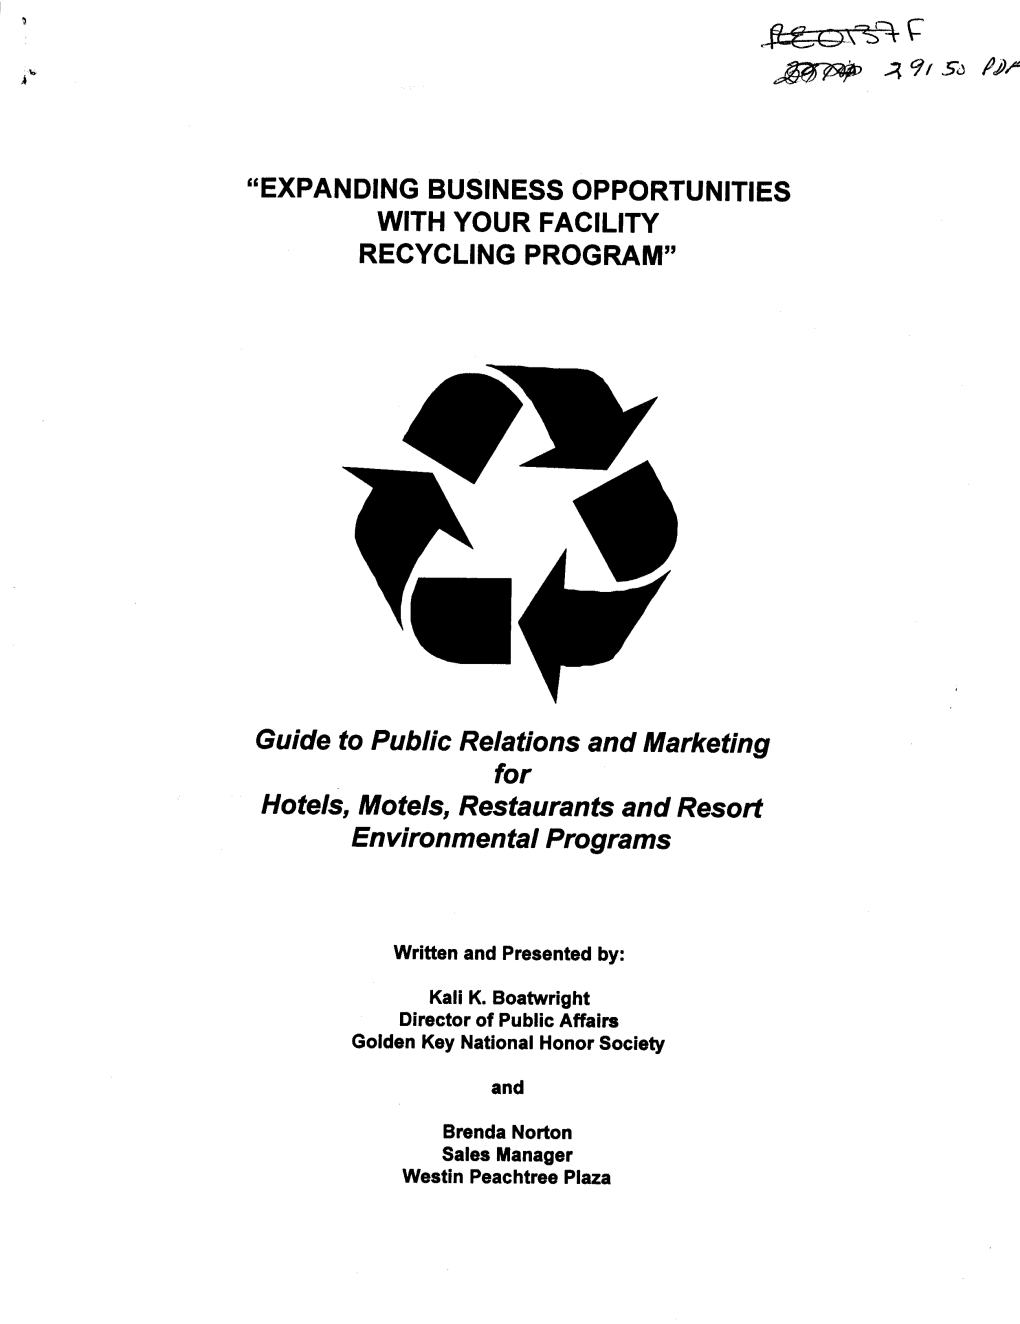 Expanding Business Opportunities with Your Facility Recycling Program”